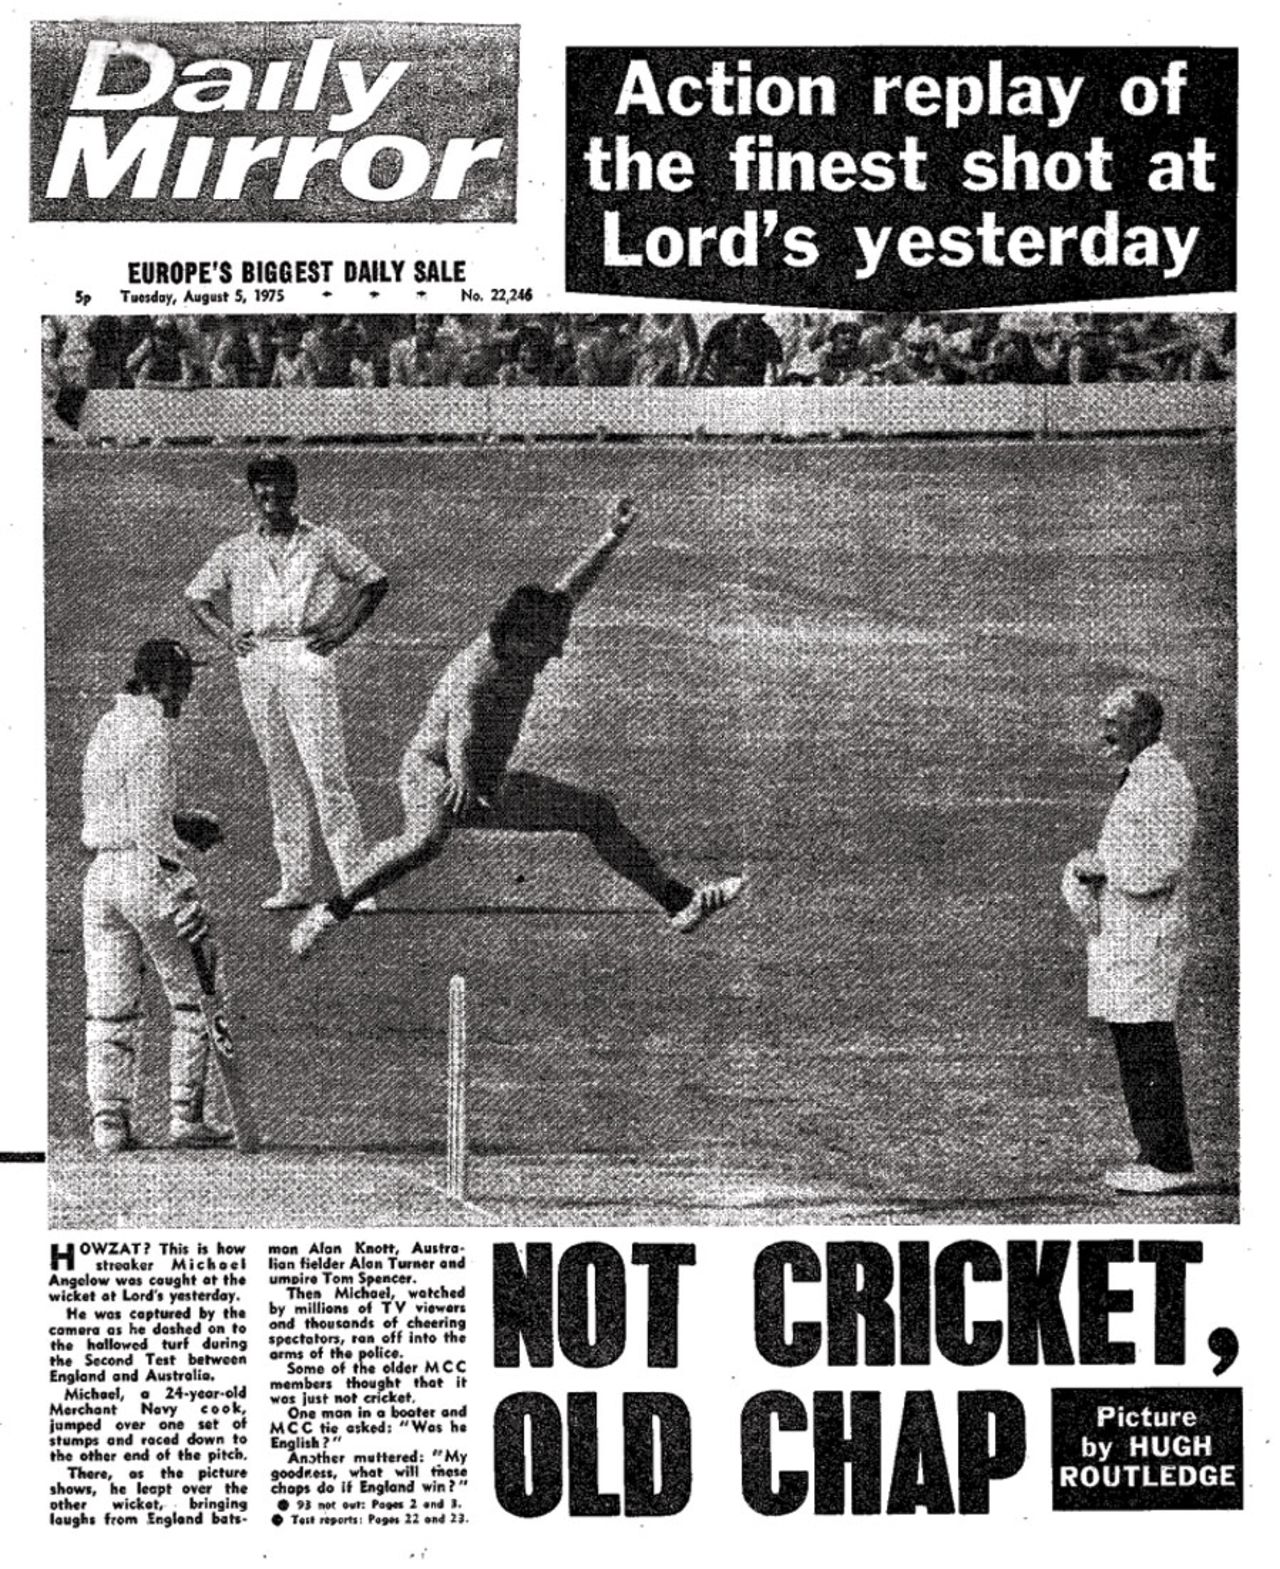 Michael Angelow's streak during the Lord's Test makes the front pages, England v Australia, 2nd Test, Lord's August 4, 1975